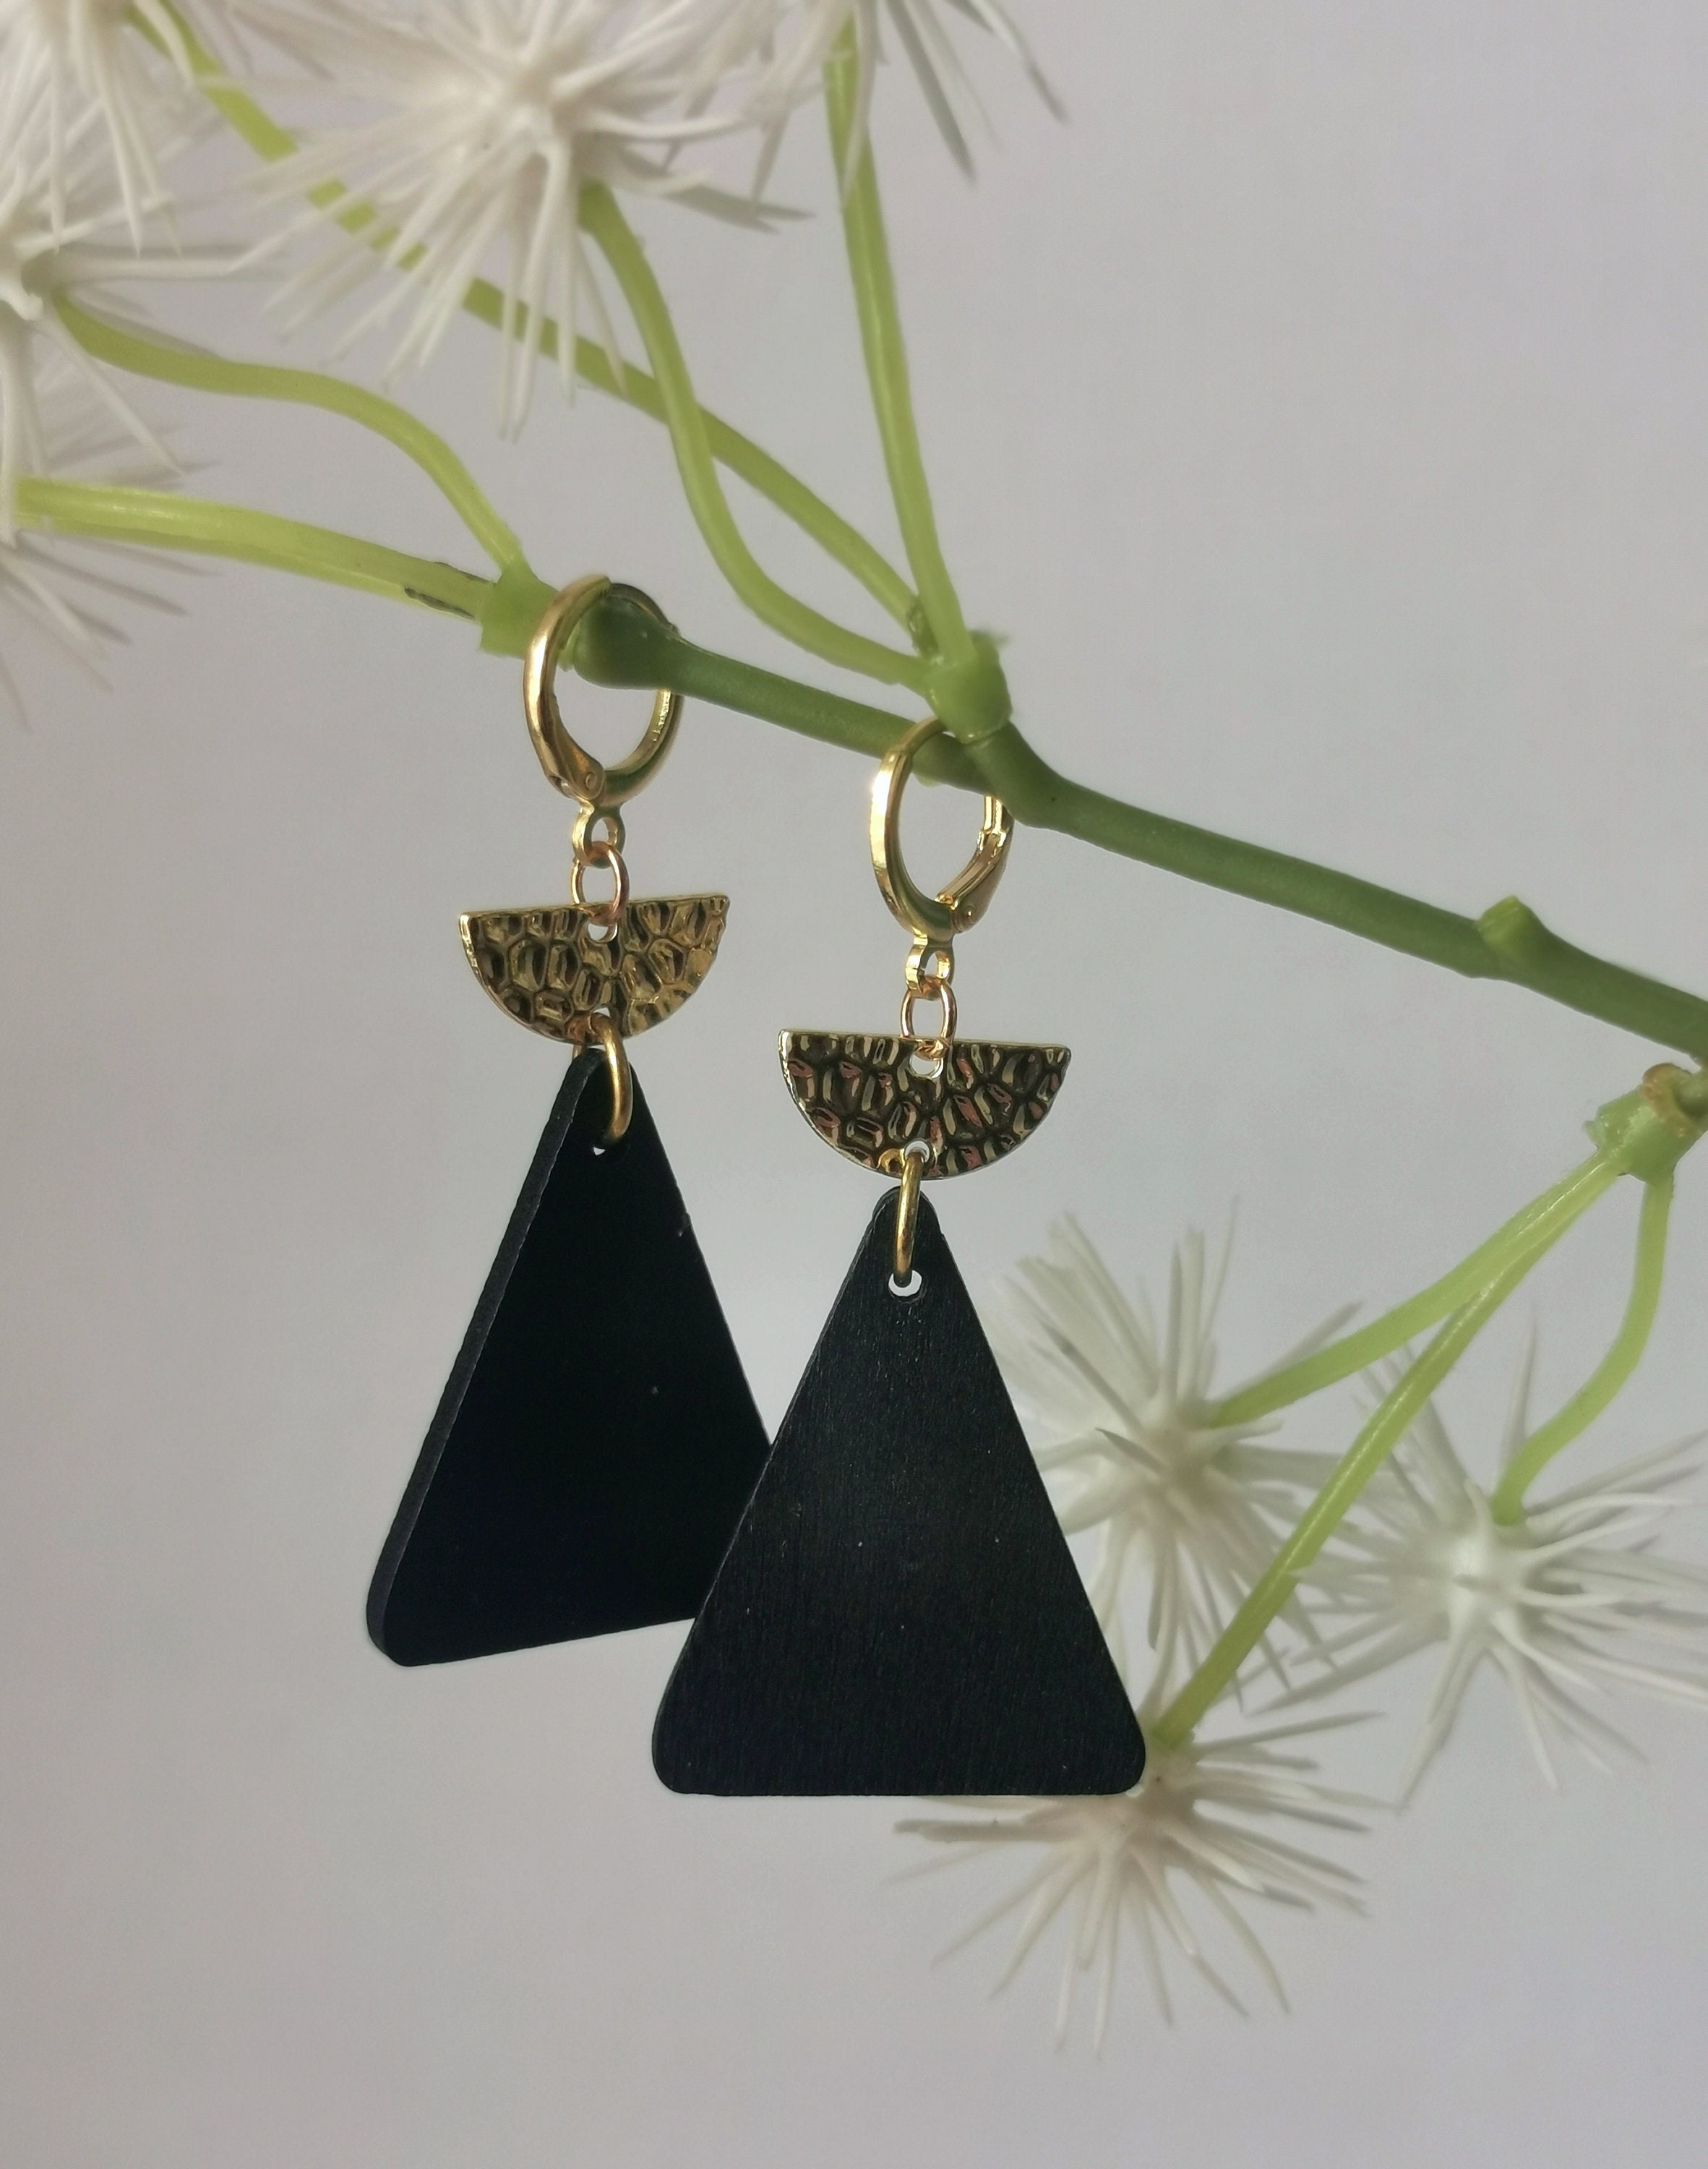 Geometric Earrings With Black Wooden Triangle & Hammered Gold Plated Half Moon Charm Round 18K Lever Back Hoops